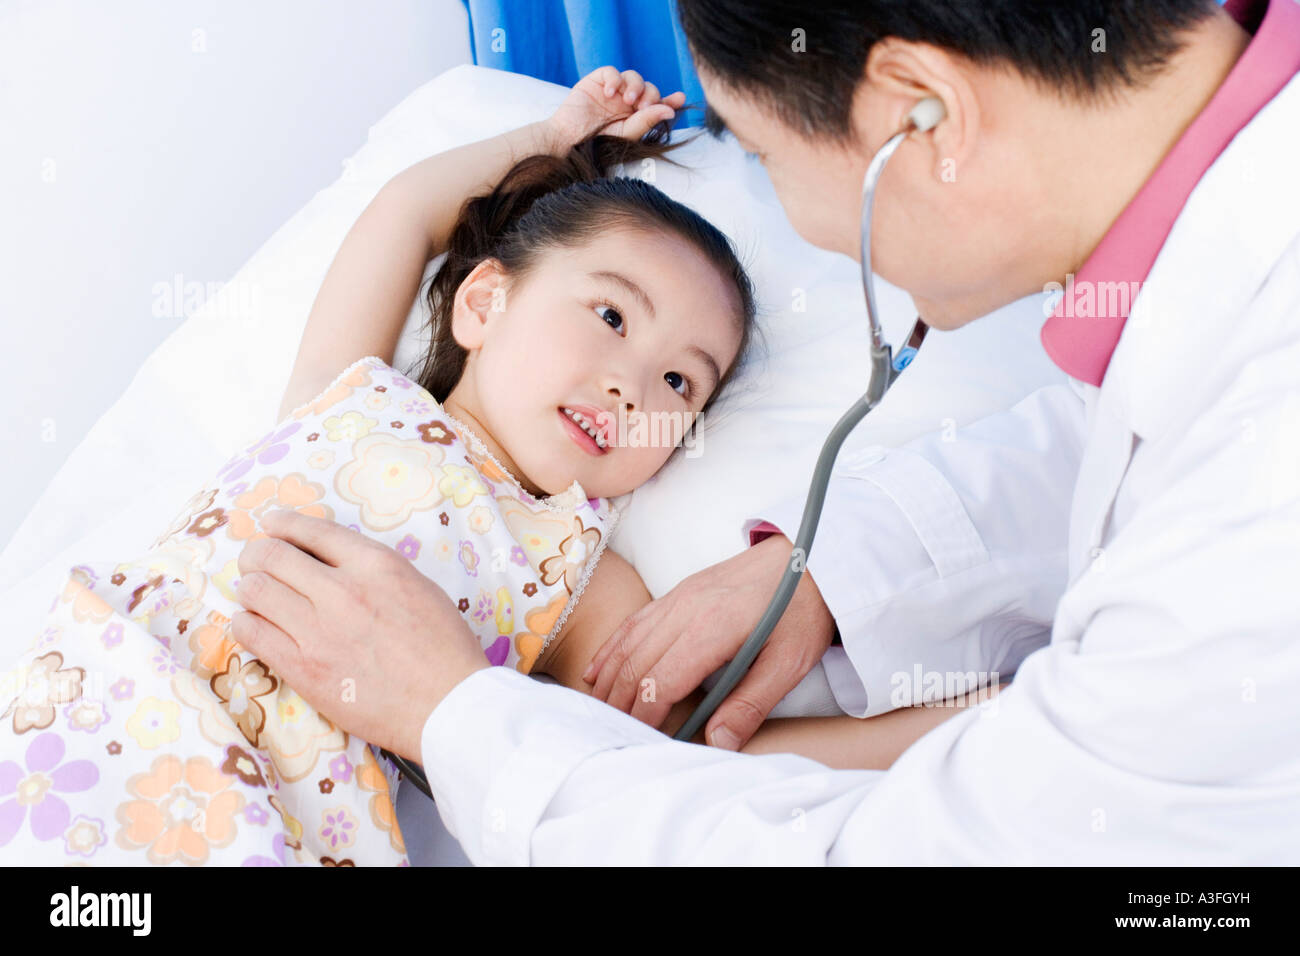 Close-up of a girl being examined by a male doctor Stock Photo